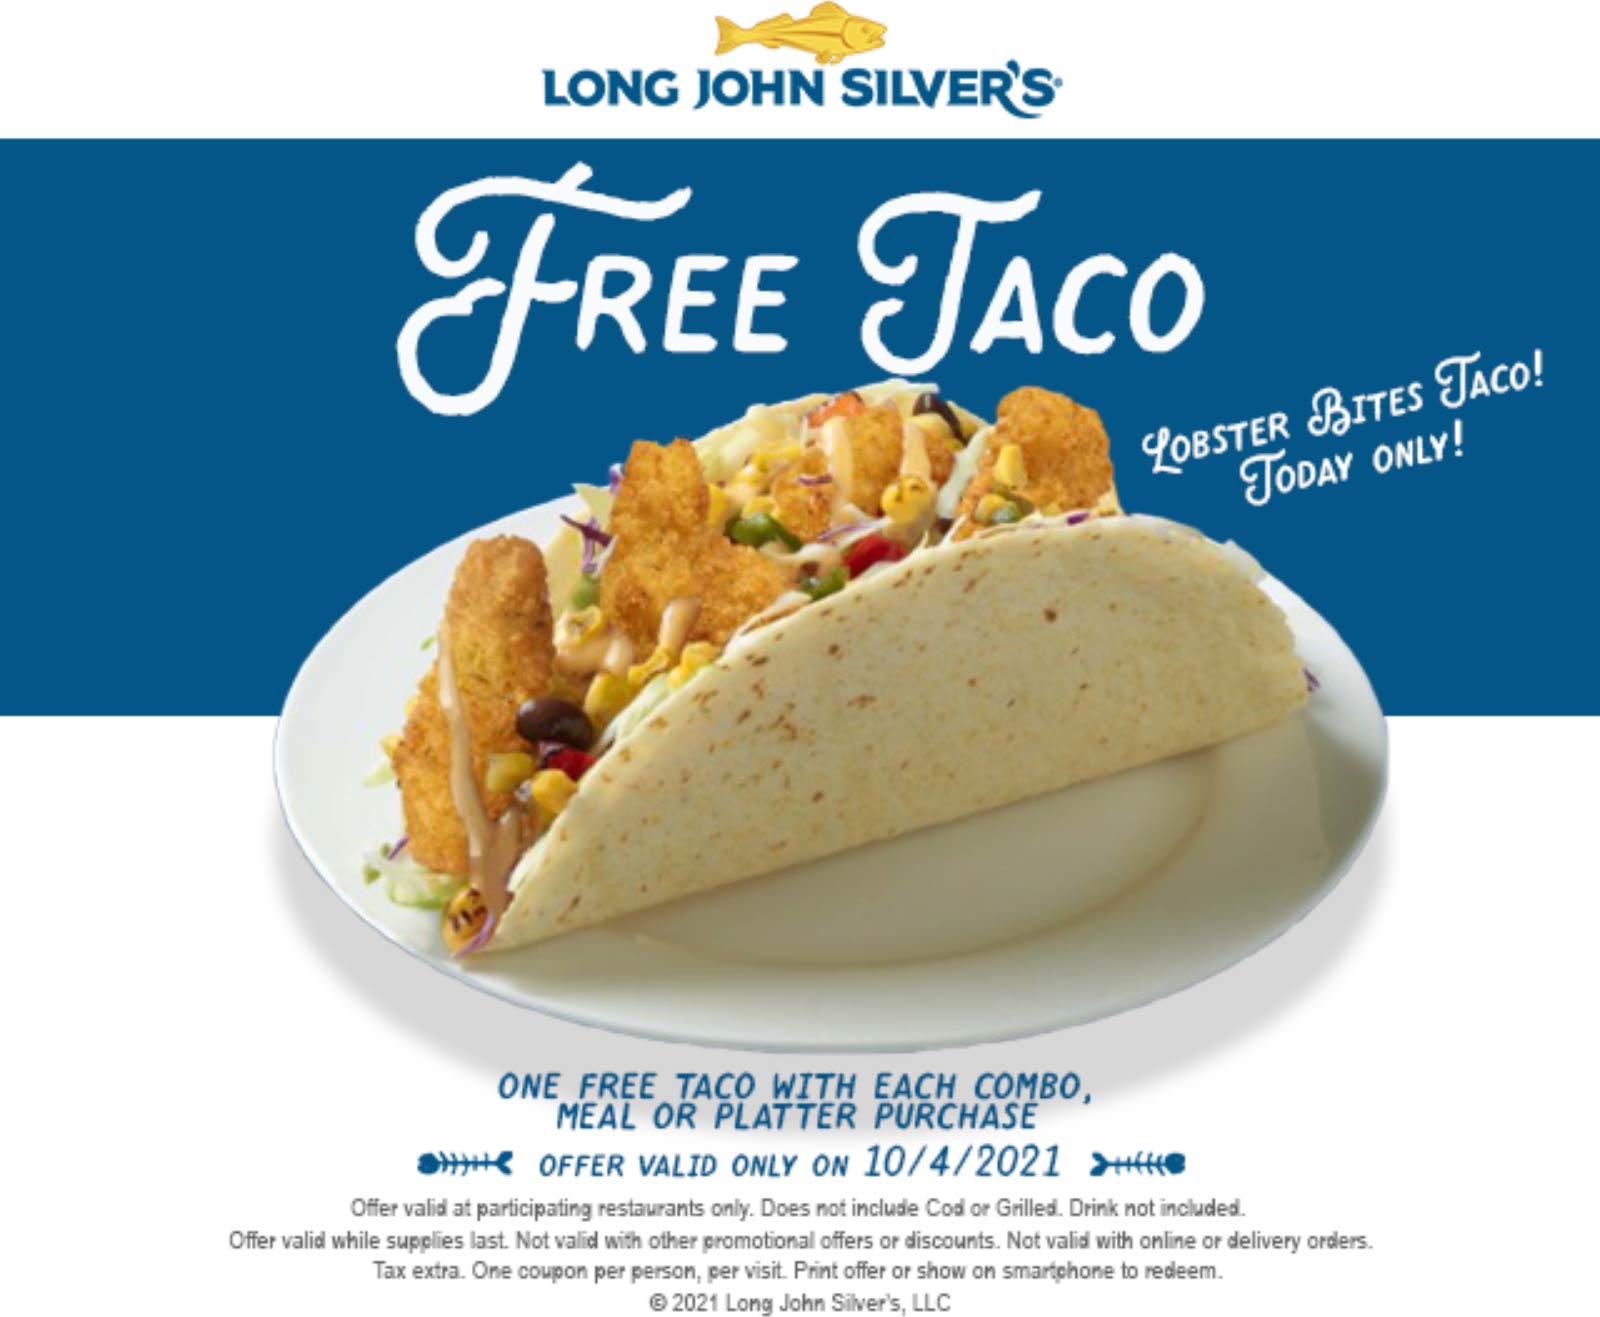 Long John Silvers restaurants Coupon  Free taco with your meal today at Long John Silvers #longjohnsilvers 